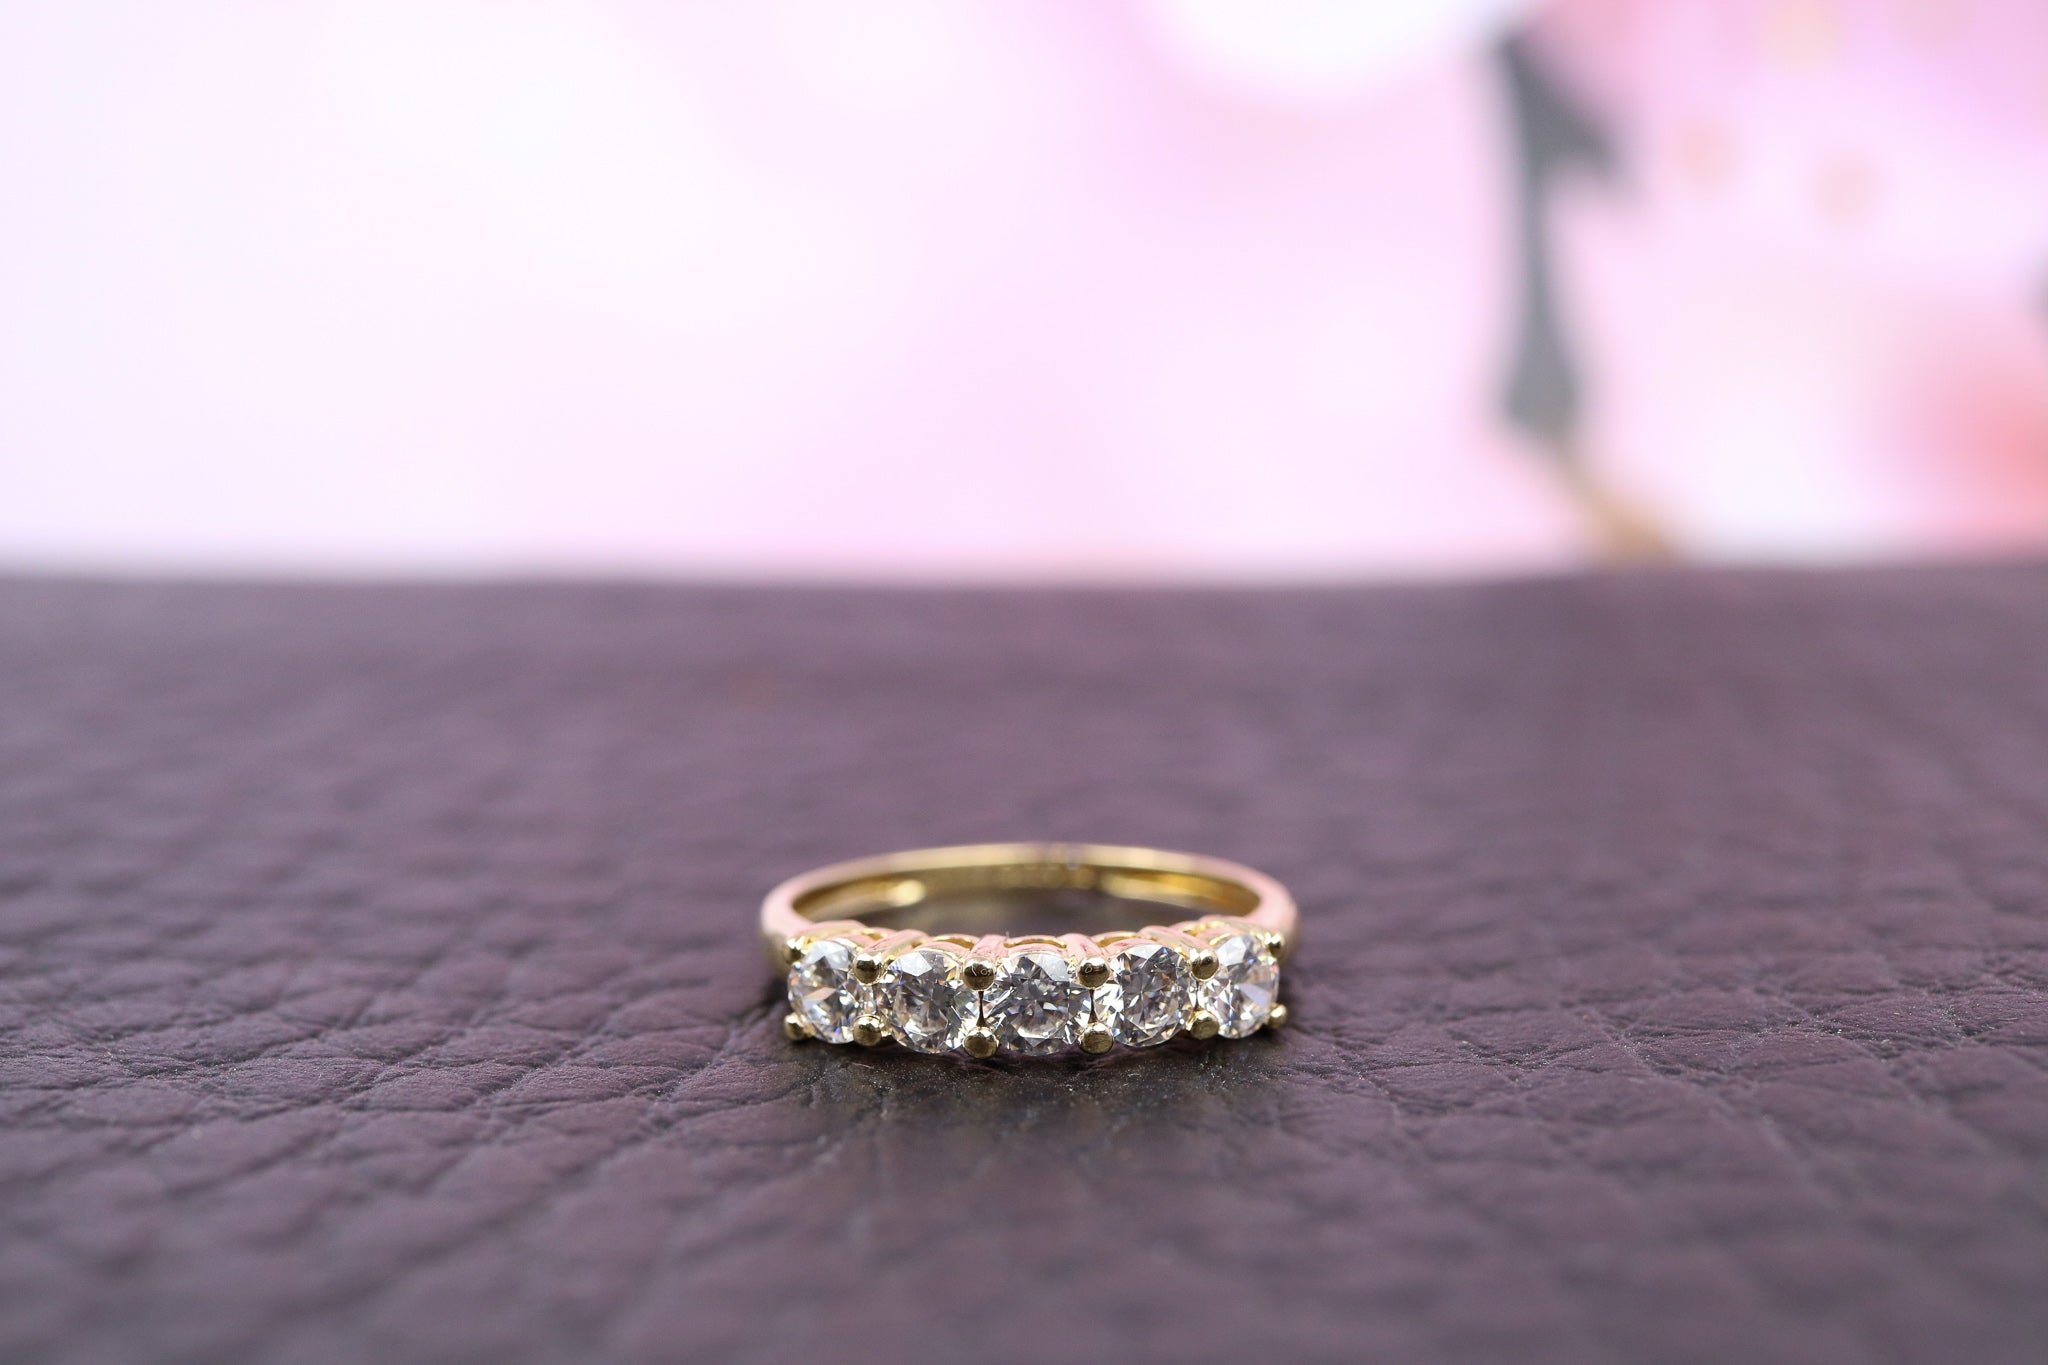 18ct Yellow Gold & Cubic Zirconia Ring - HJ2490 - Hallmark Jewellers Formby & The Jewellers Bench Widnes